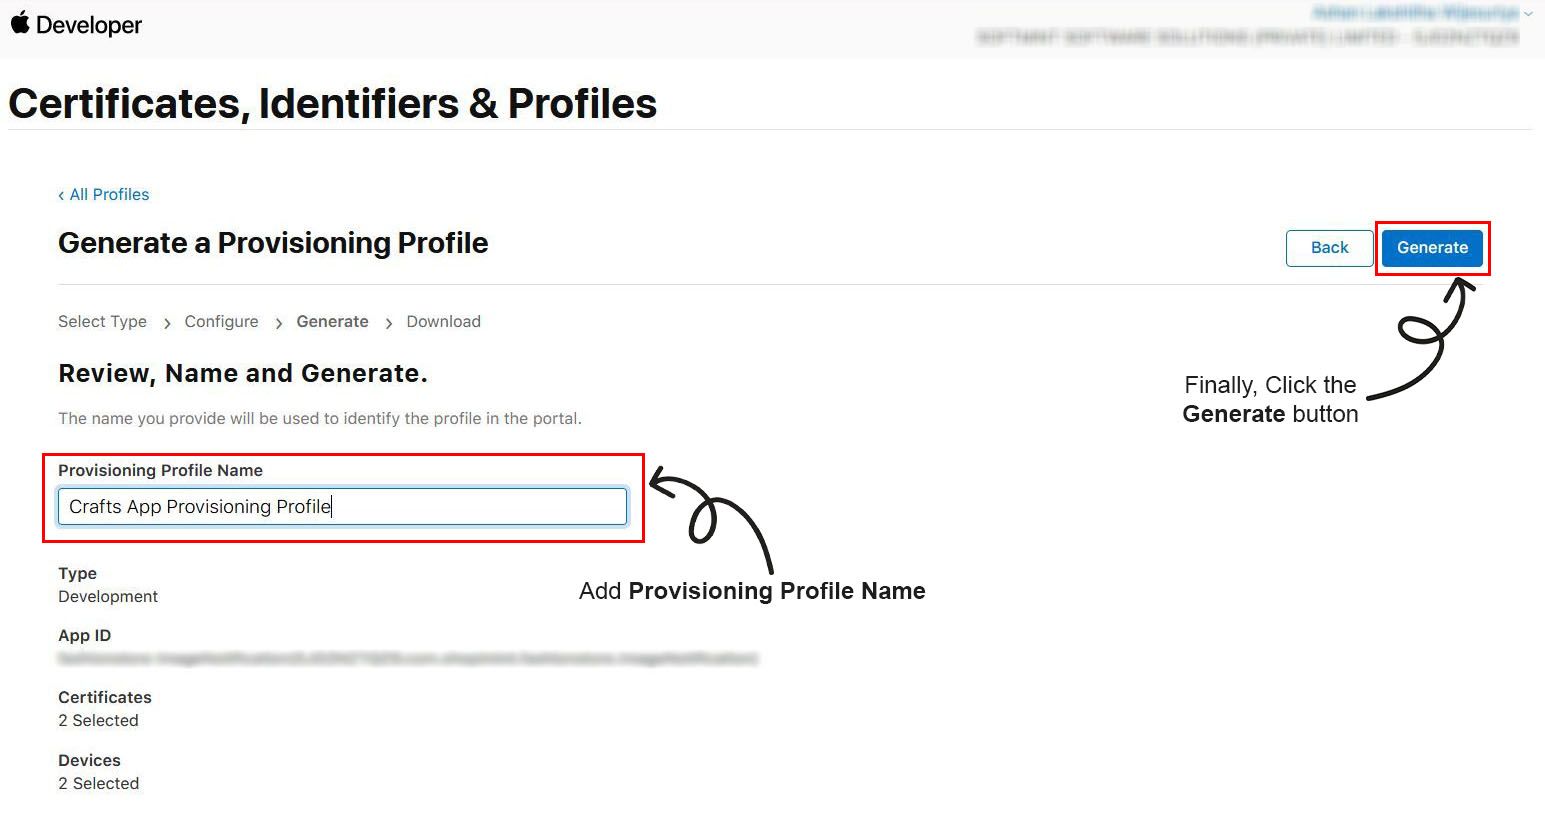 How to generate a Provisioning Profile ?